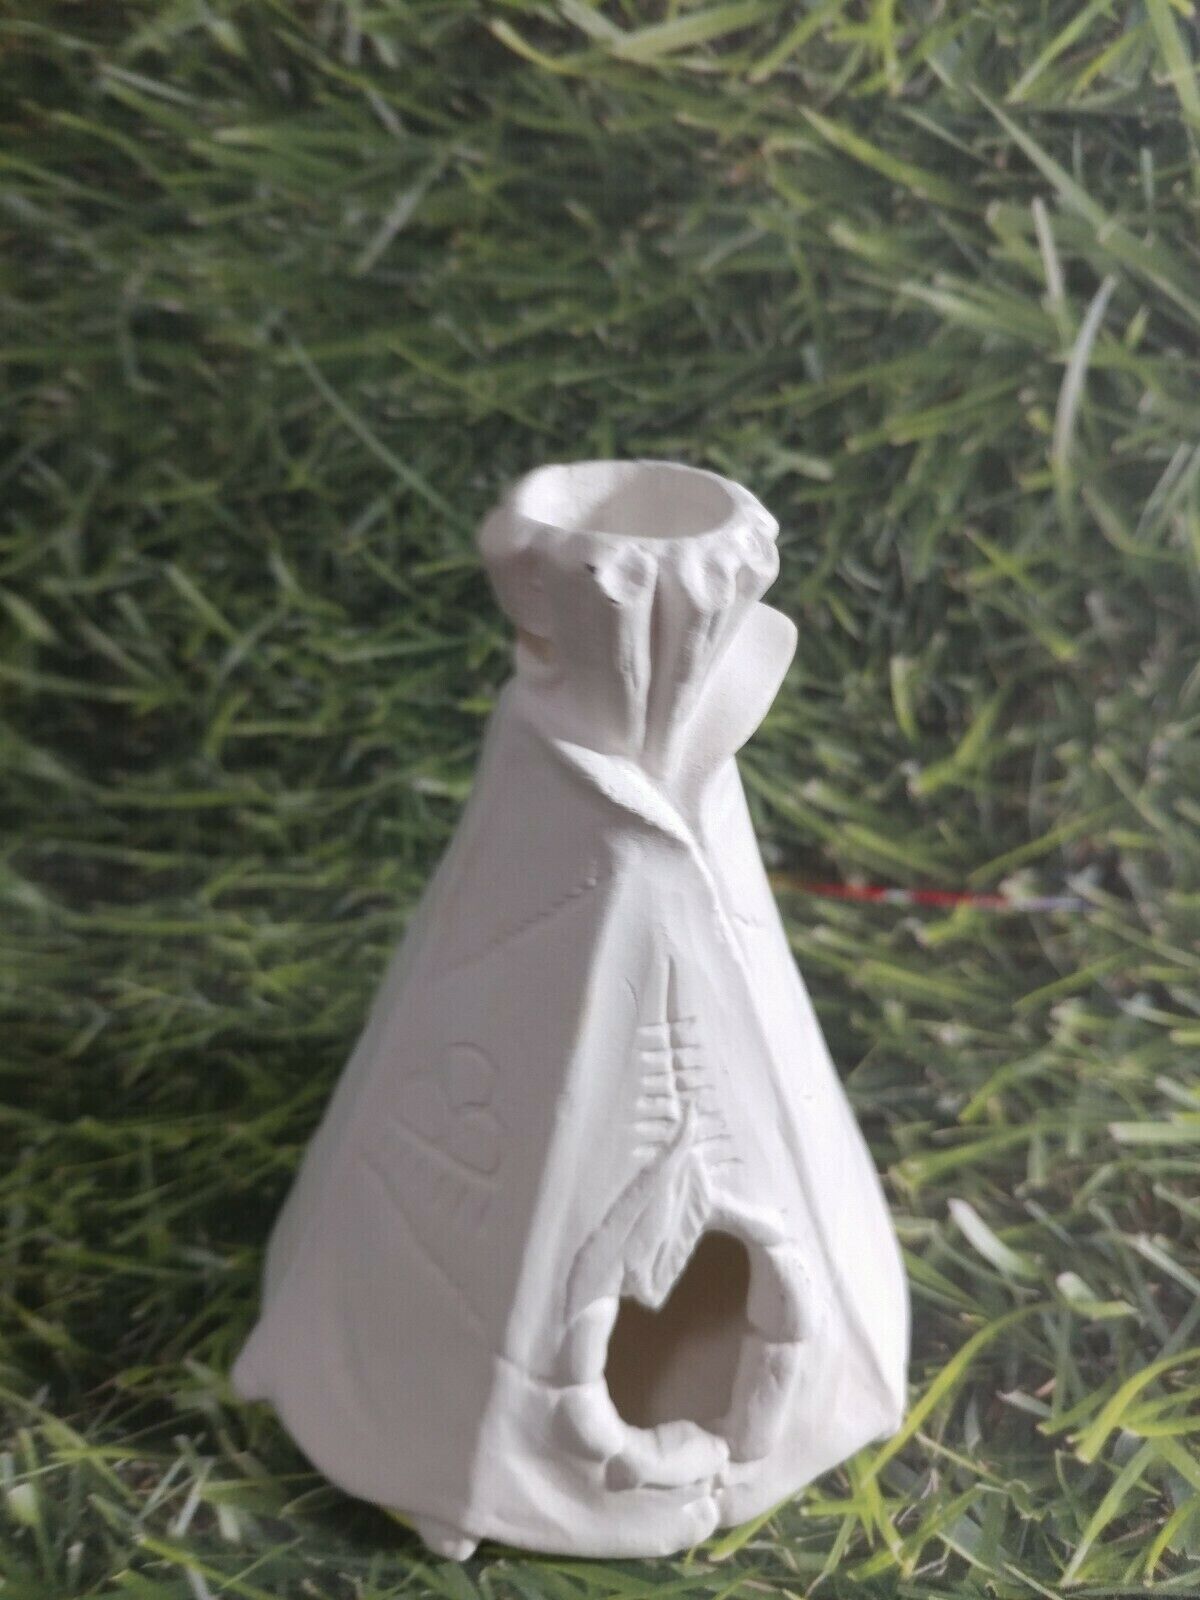 Tepee Ceramic bisque- ready to paint- Christmas ornament S 123